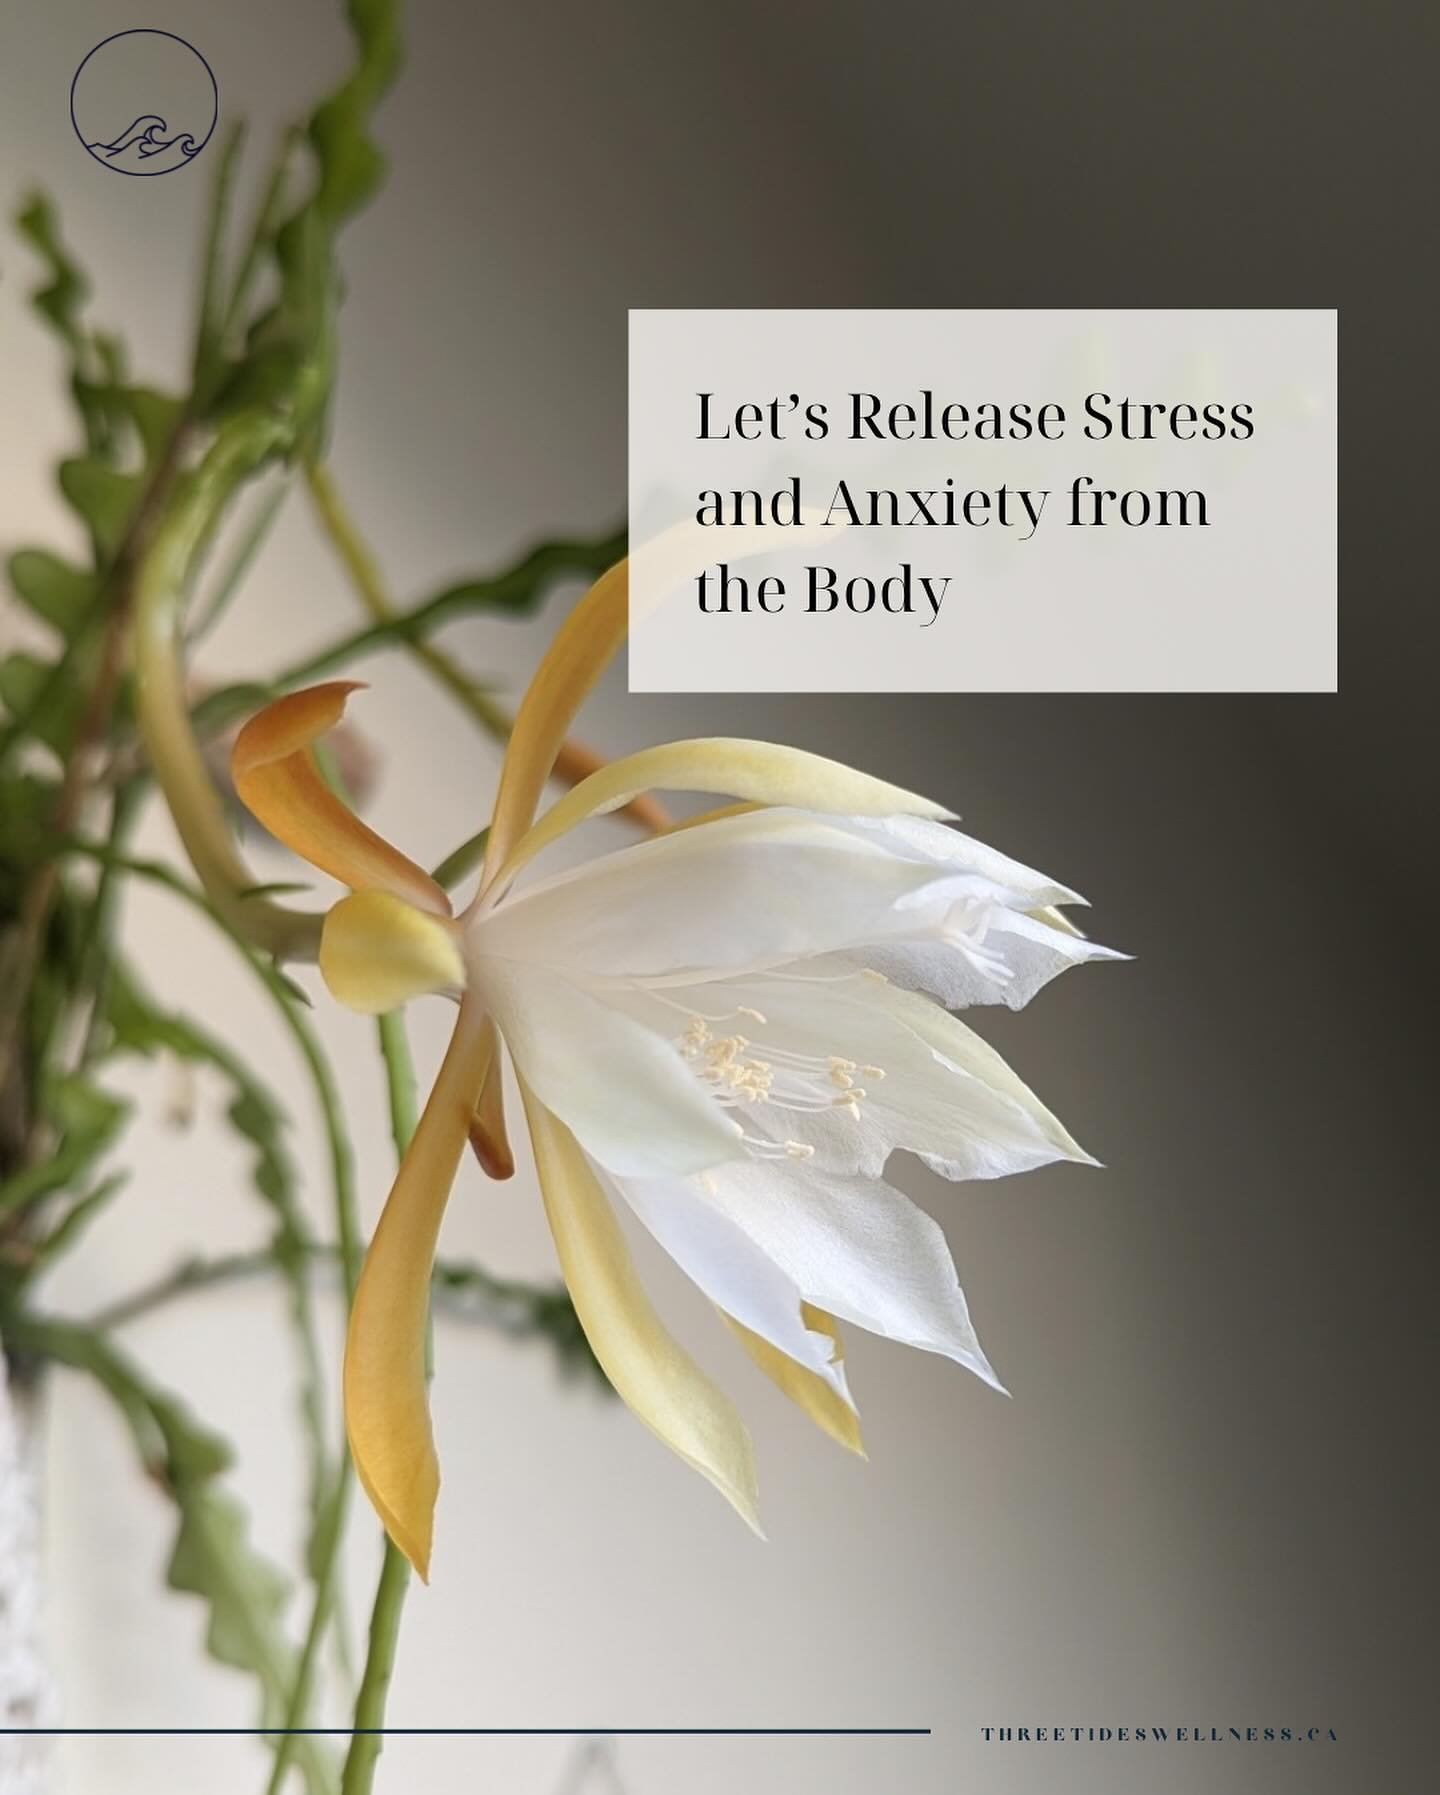 🌟 Weekend Wellness Reminder 🌟

Whether you&rsquo;re chilling at home or out and about, take a moment to release some of the stress and anxiety we often hold in our bodies. 

Stress and anxiety can really take a toll on both our minds and bodies. Th